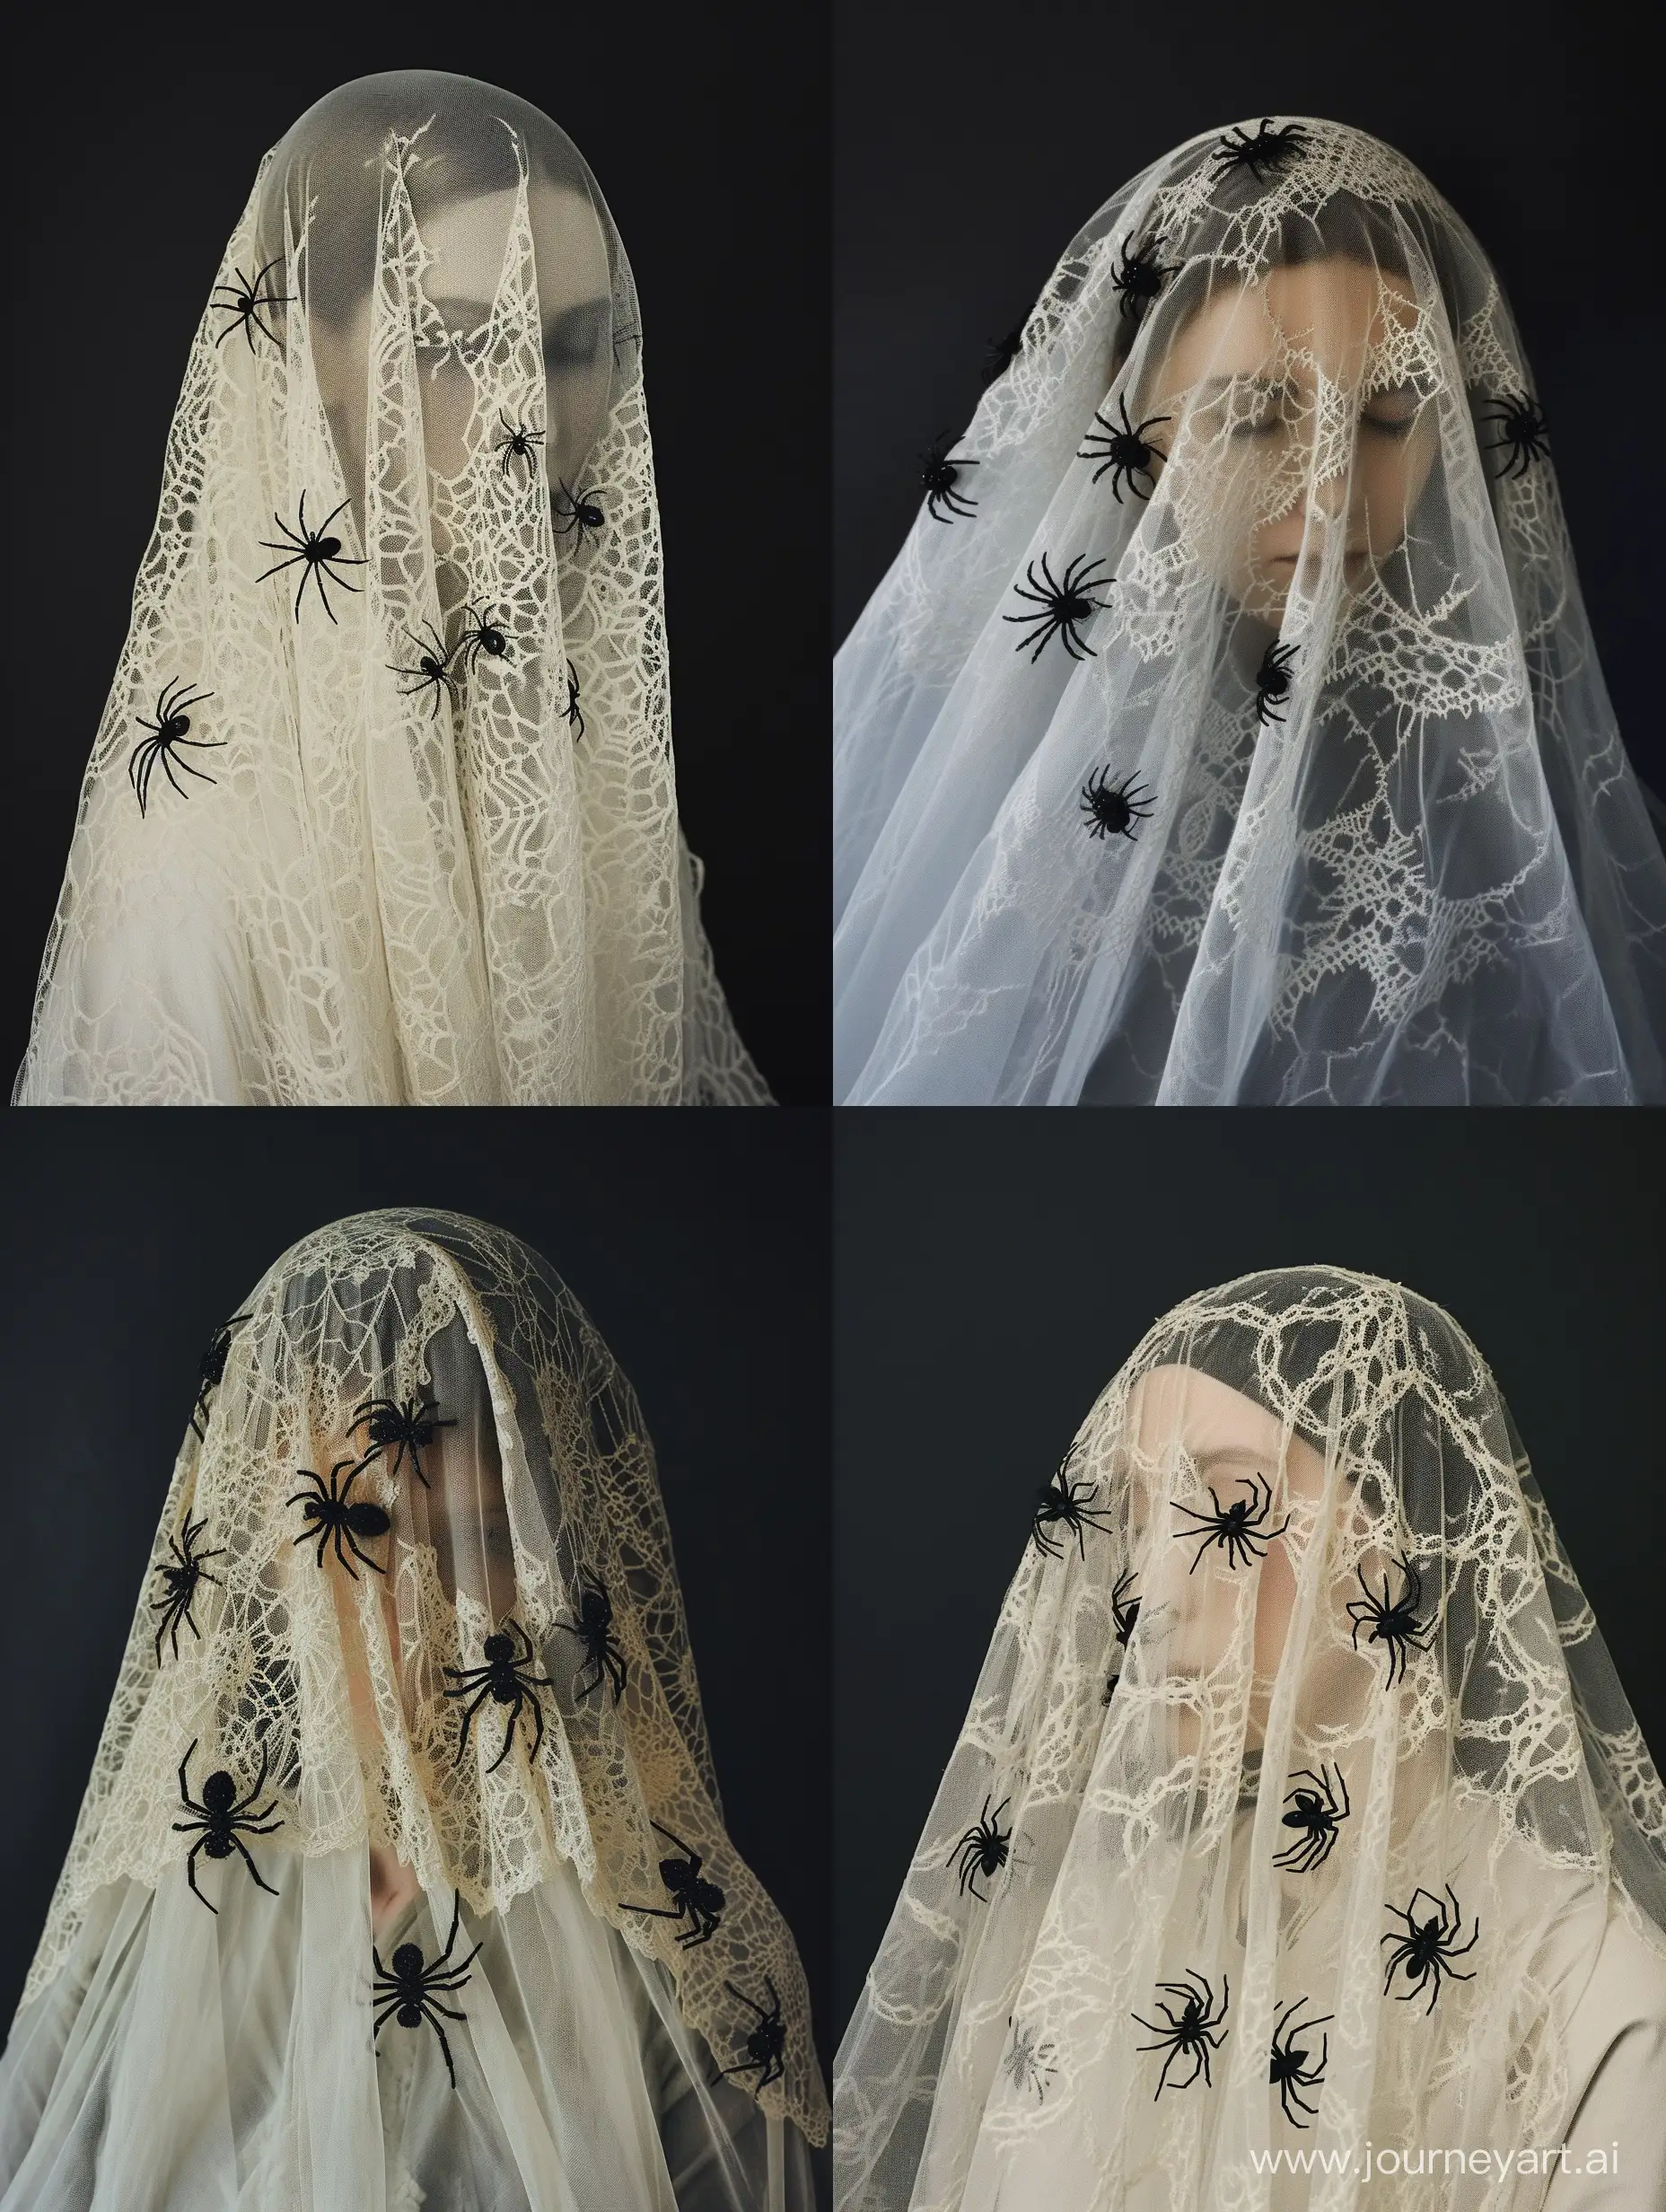 /imagine prompt:
color photo of a woman,
wearing a lace veil that completely obscures her face,
the delicate fabric adorned with black widow spiders,
crawling in a haunting and mesmerizing manner.

Against a black background,
the contrast emphasizes the enigmatic nature of the scene,
as the woman becomes a vessel of witch core,
evoking a sense of pagan horror and mystical allure.

Through the veil, her features remain hidden,
leaving her identity shrouded in mystery,
while the presence of the spiders adds an unsettling touch,
a symbol of danger and potent feminine power.

The photo captures the essence of witchcore,
where darkness intertwines with ancient traditions,
creating an image that both fascinates and unnerves,
drawing viewers into a realm of occult secrets.

Unlikely collaborators:
Dario Argento, the master of Italian horror and surreal visuals,
Alexander McQueen, the fashion designer blending darkness with high fashion,
Anja Harteros, the opera singer with a hauntingly powerful voice,
Pam Grossman, the curator exploring the intersection of art and the occult,
Ari Aster, the filmmaker delving into psychological and supernatural realms.